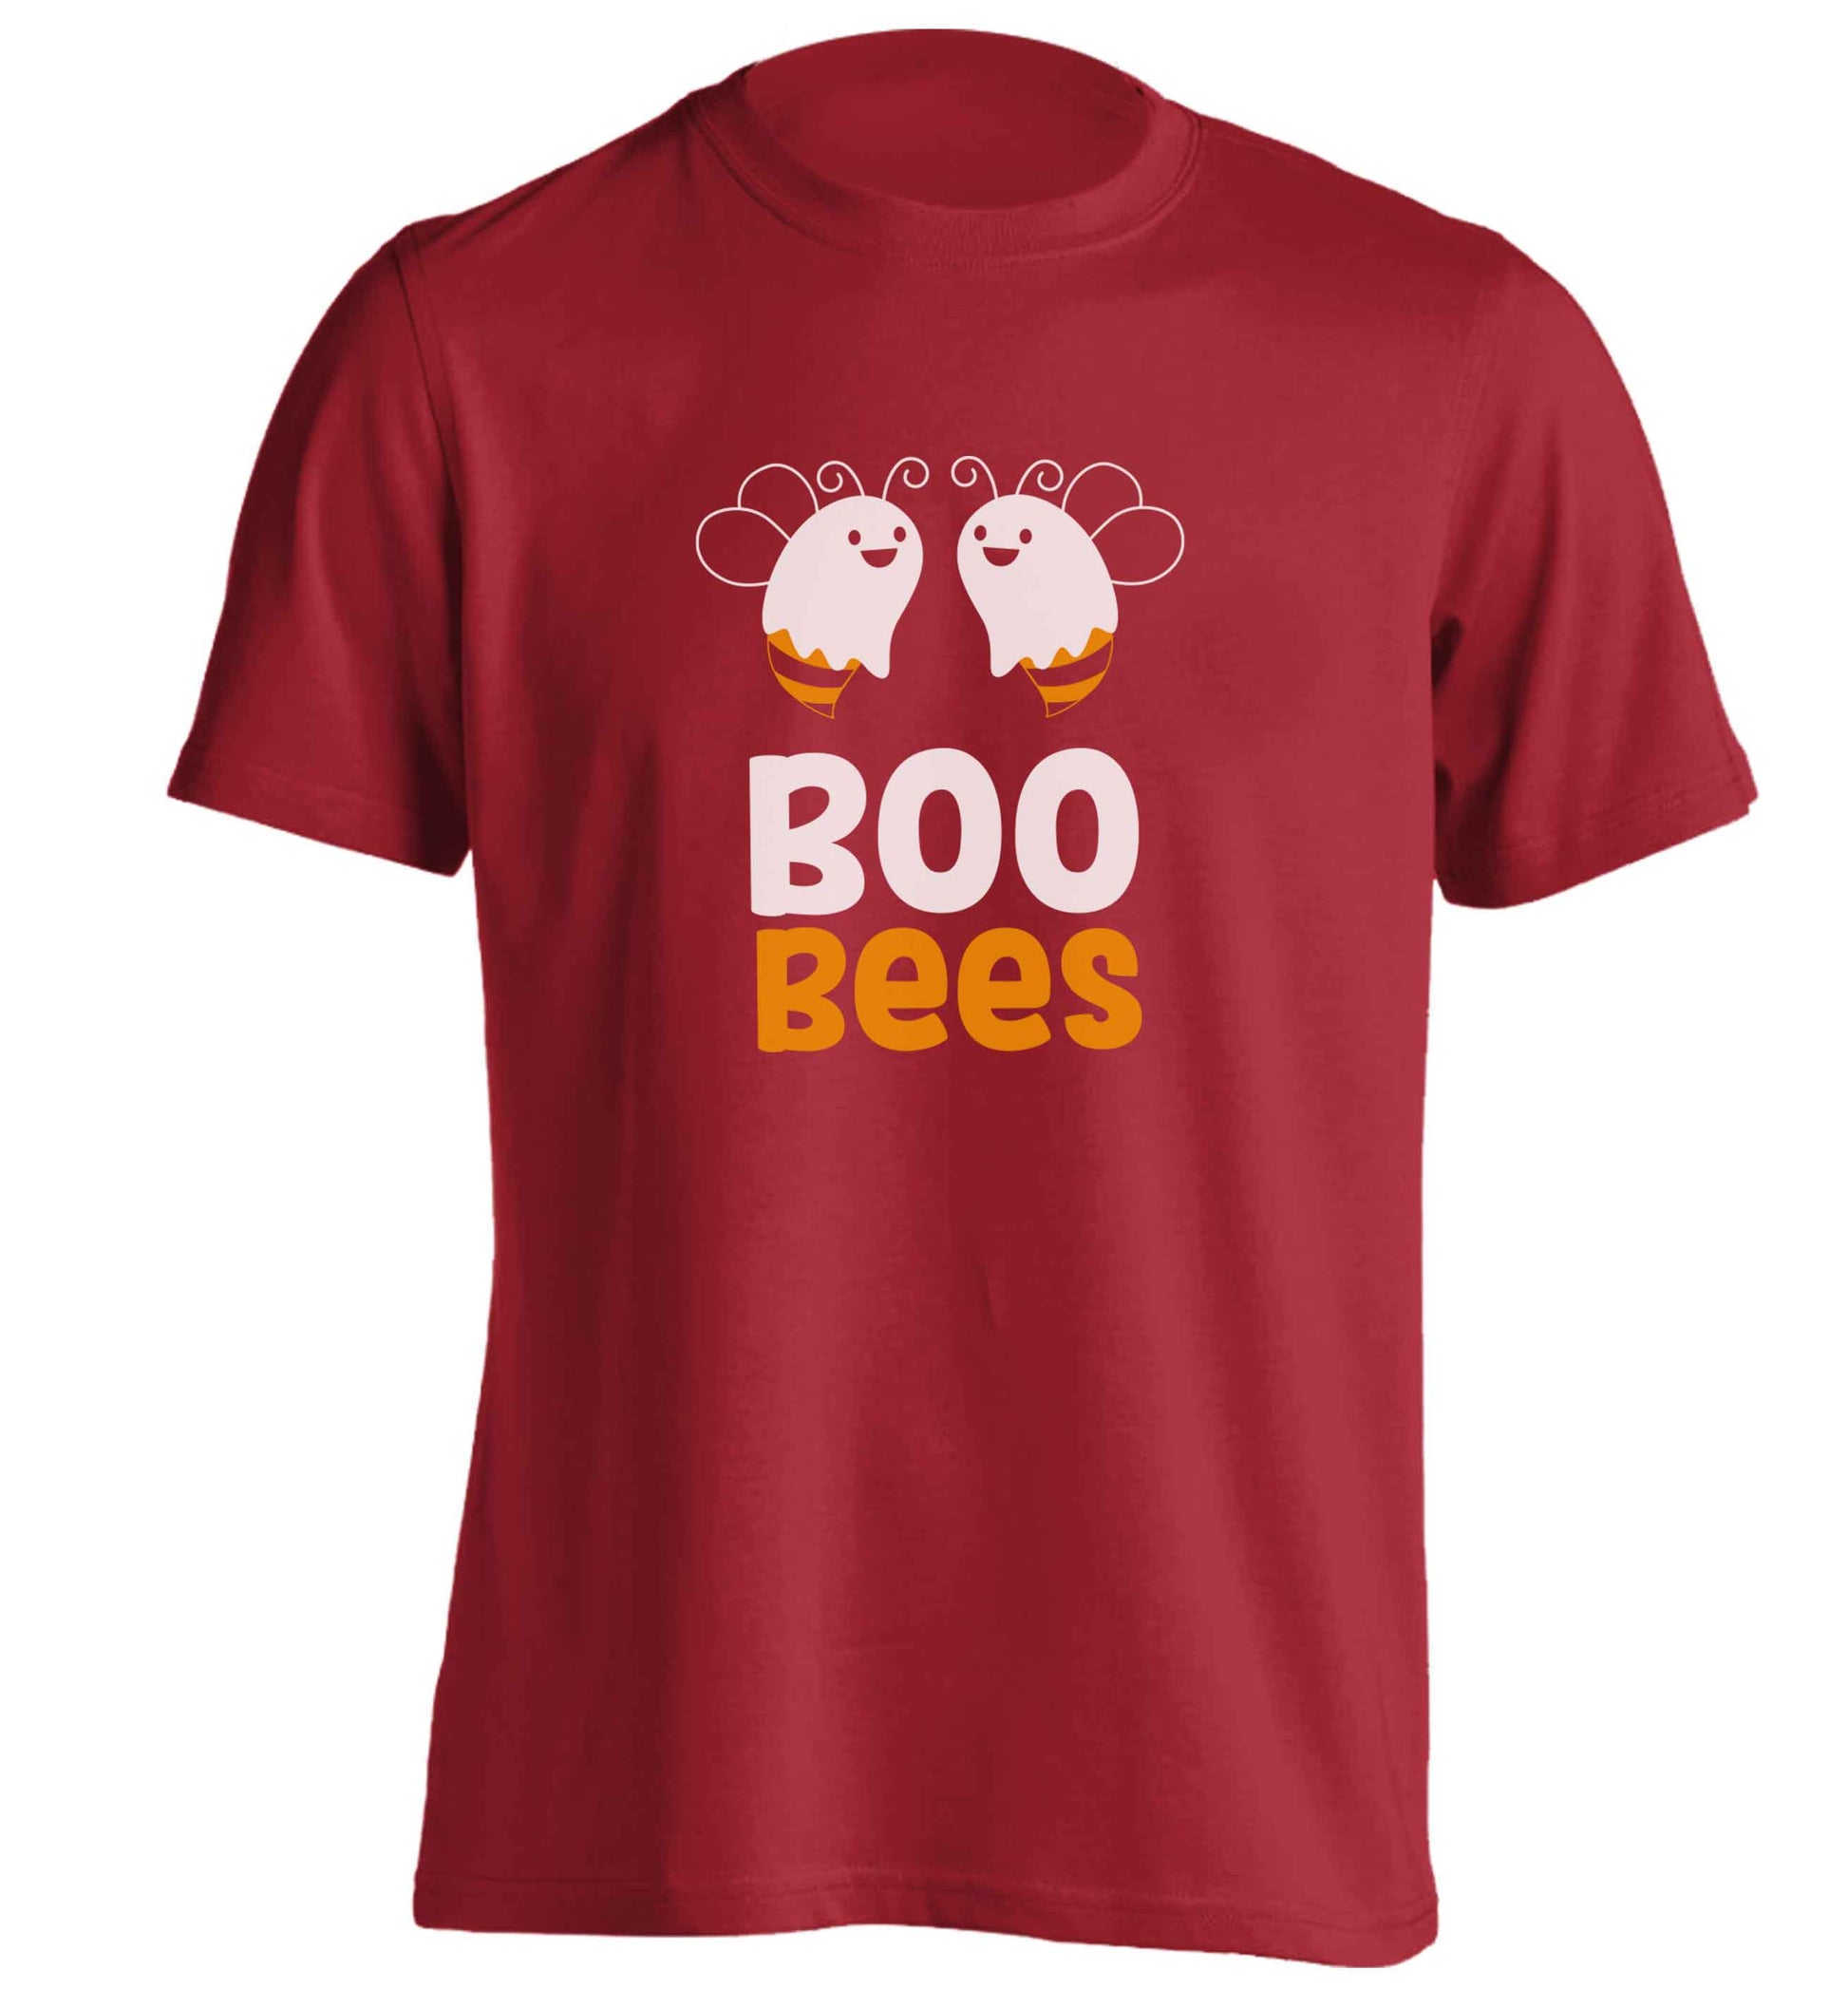 Boo bees Kit adults unisex red Tshirt 2XL